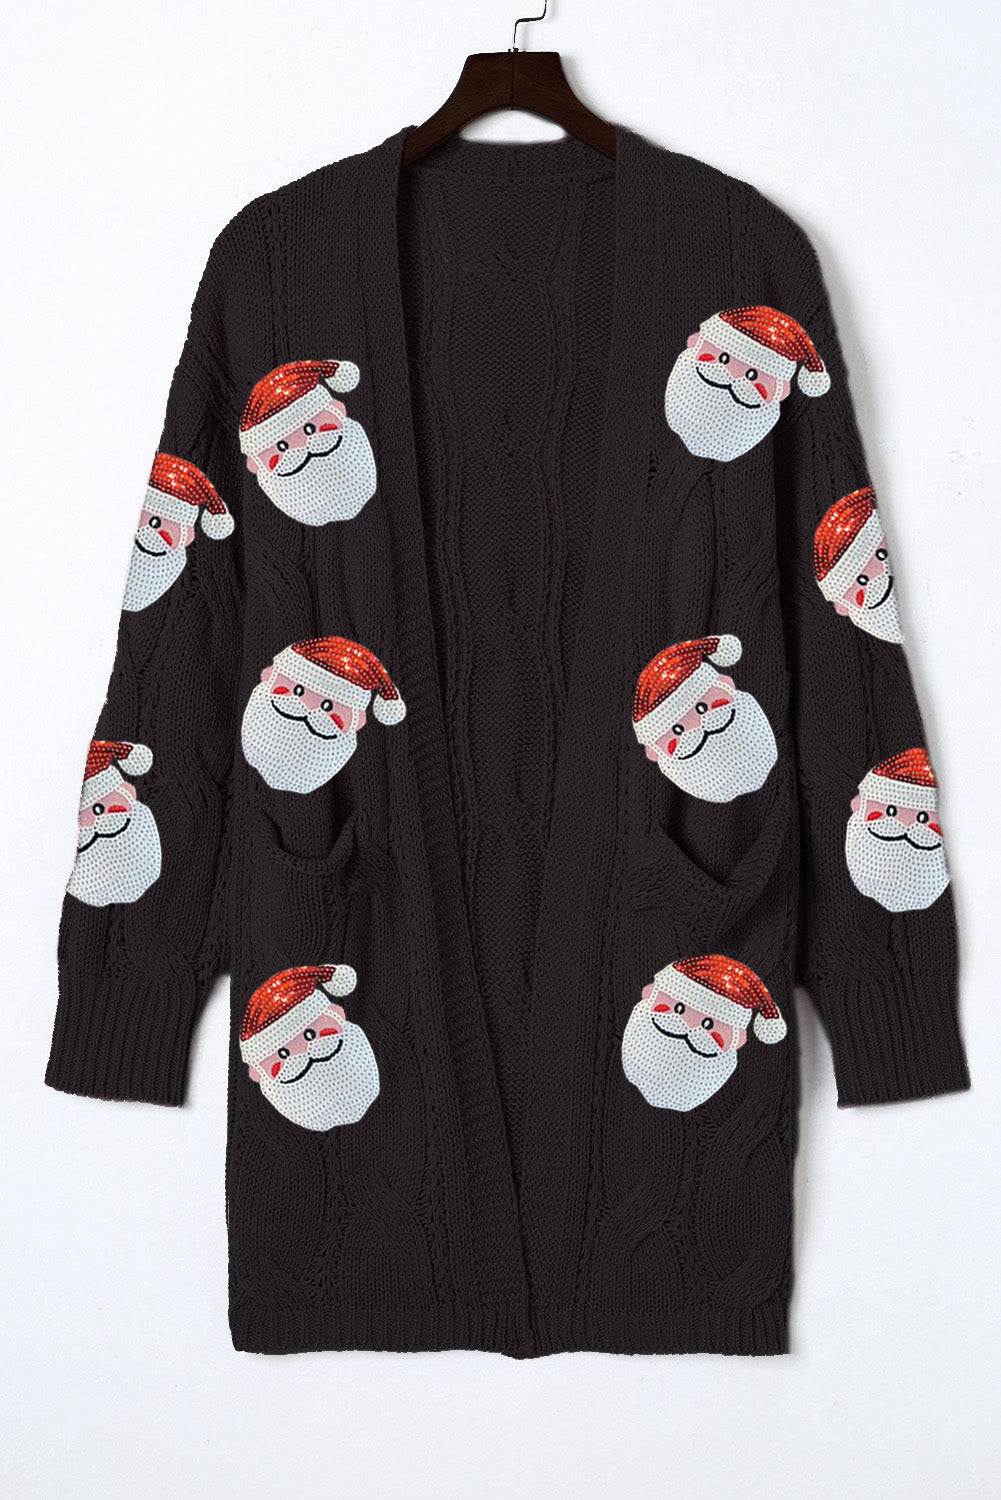 Black Sequined Santa Claus Cable Knit Open Cardigan